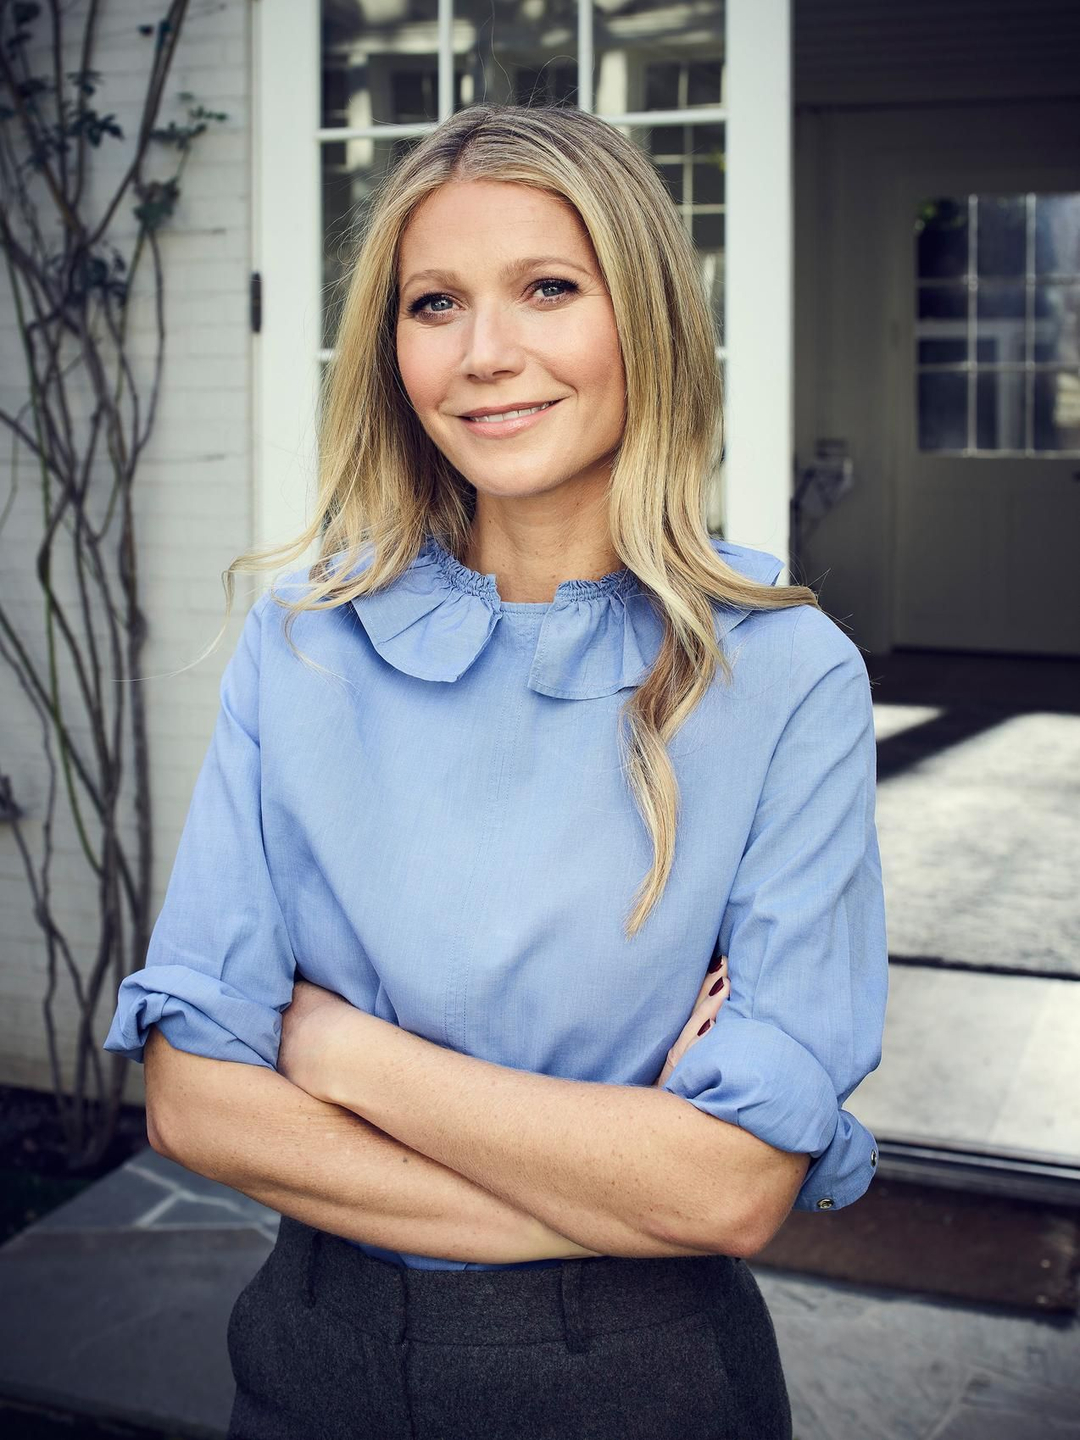 Gwyneth Paltrow who is her father